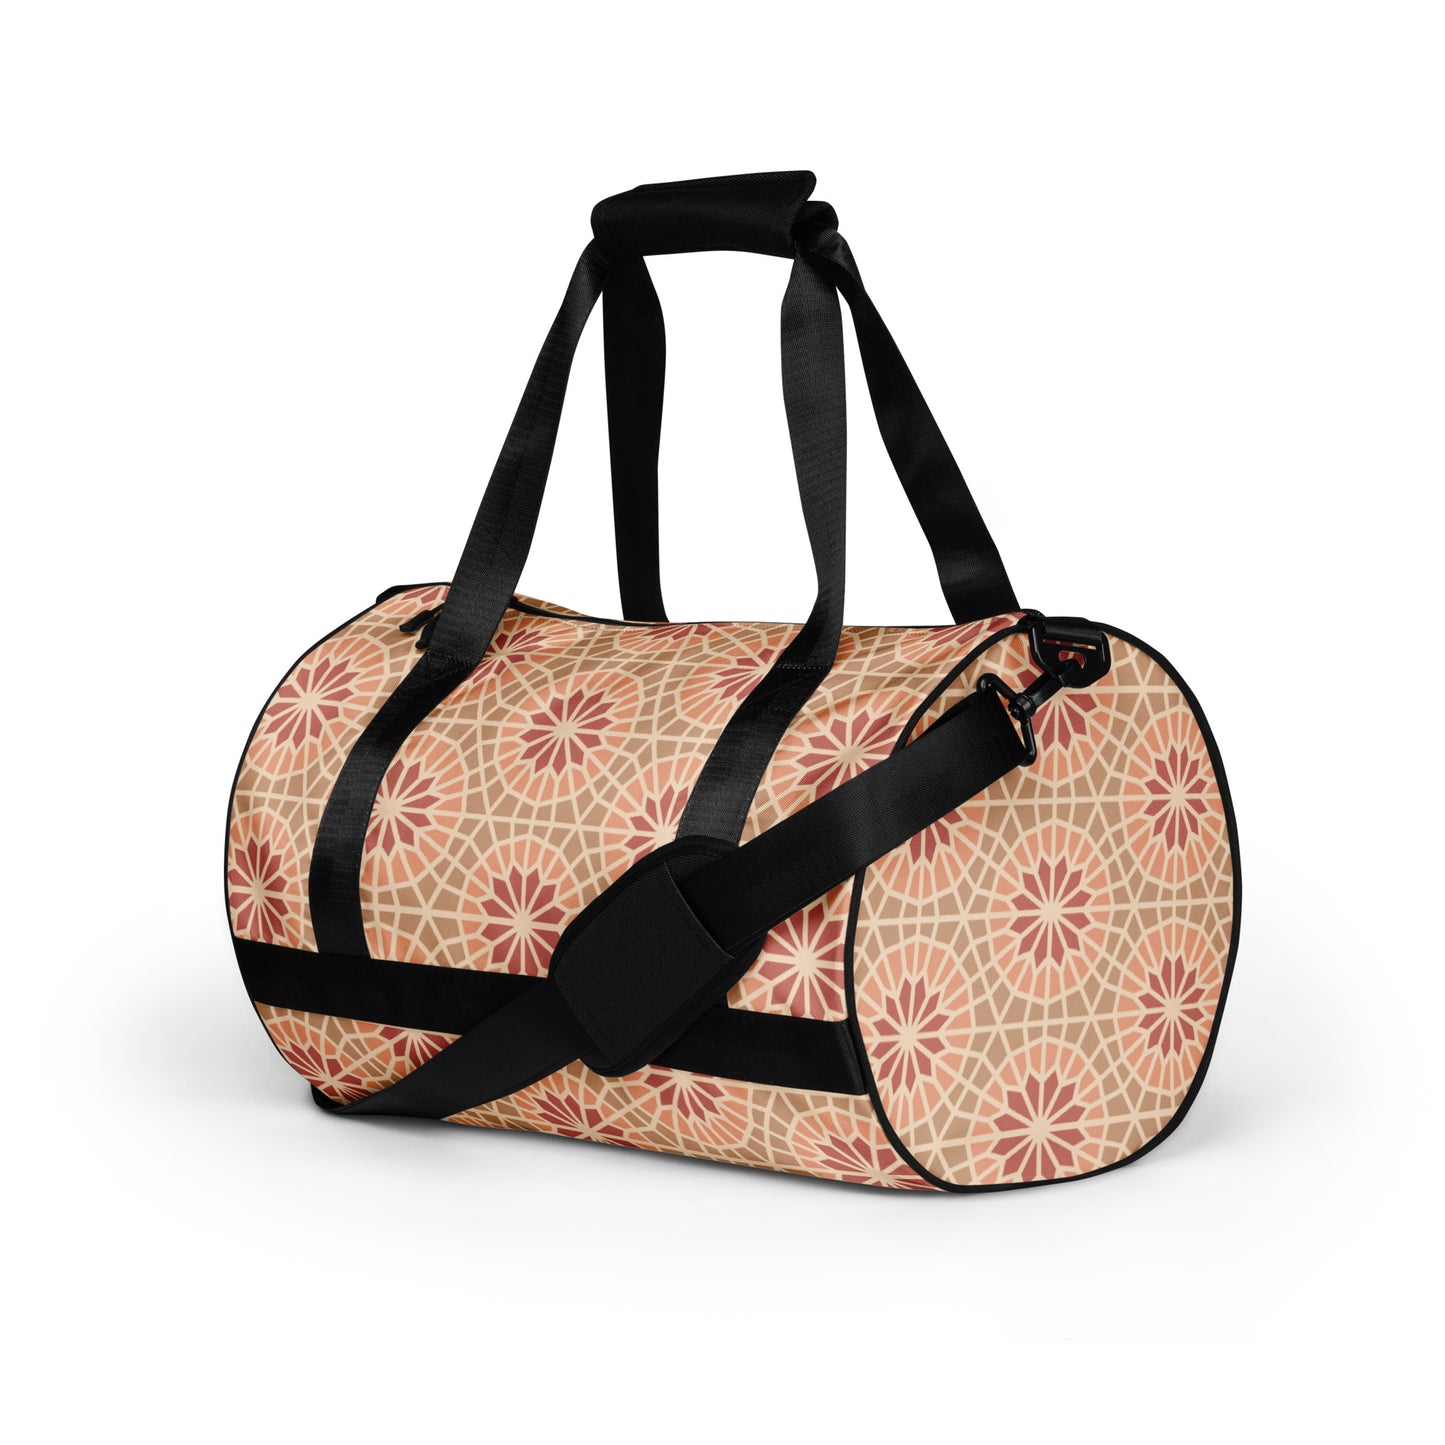 All-over print gym bag - Geometric Star in Cocoa and Cream